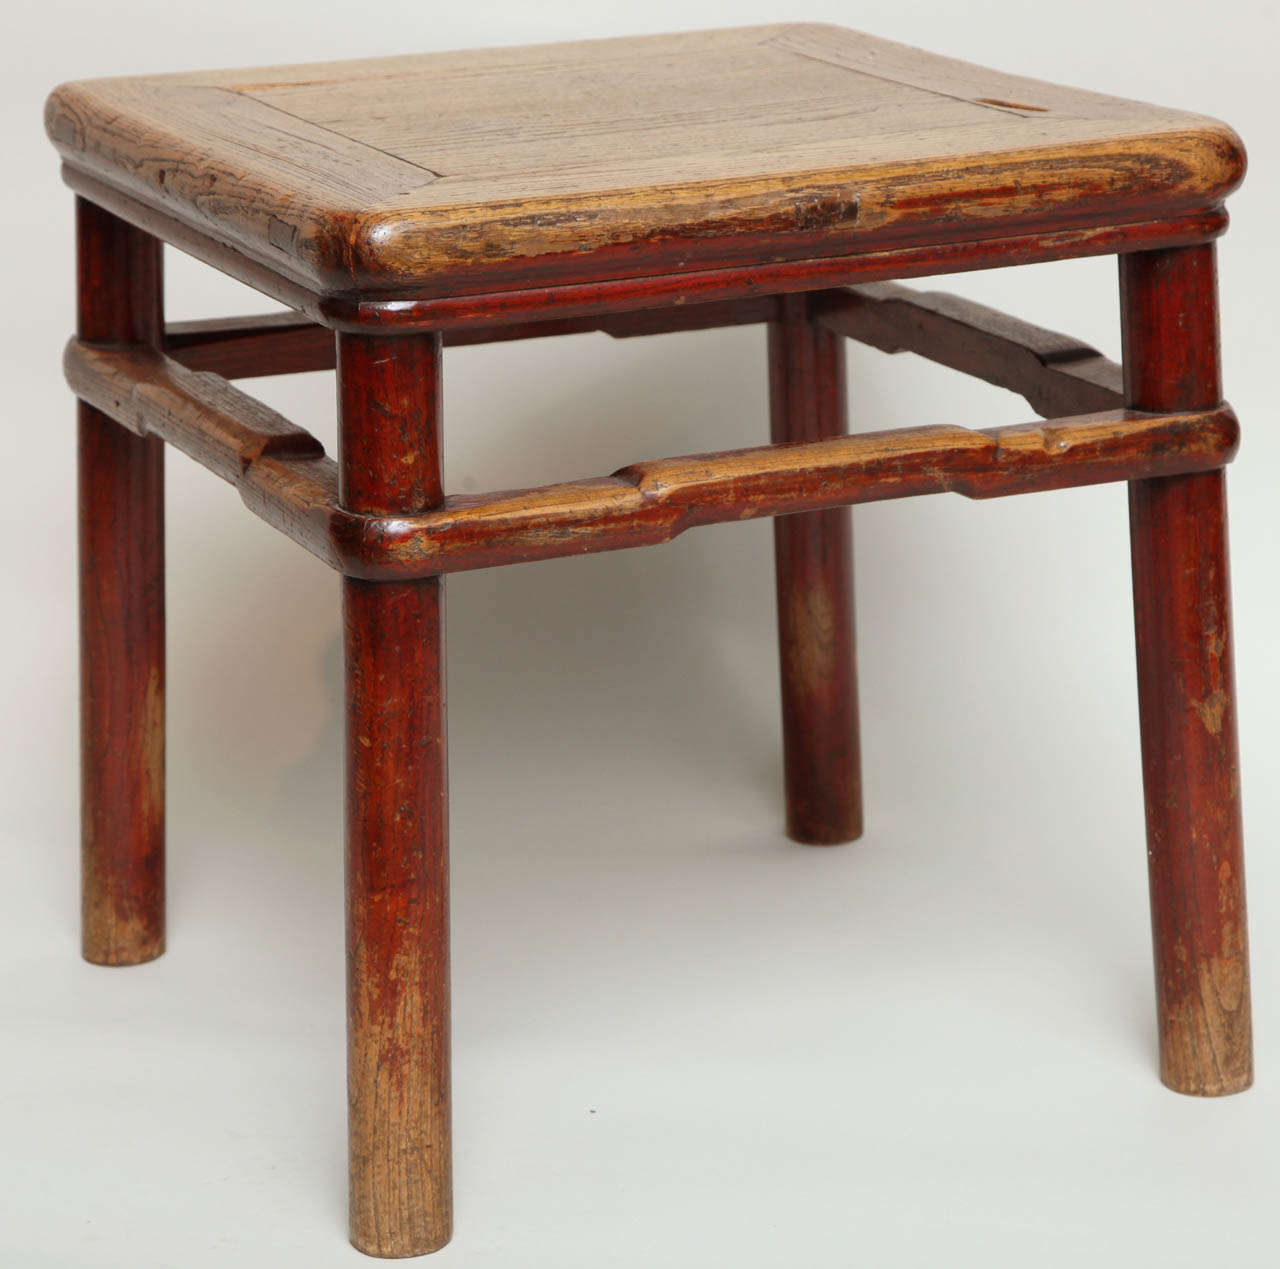 An 18th century Chinese elm square table, the single board top with mitered panel construction, over pole turned legs joined by stepped stretchers, retaining crimson lacquer surface in places and worn to a rich patina, the whole with good color.